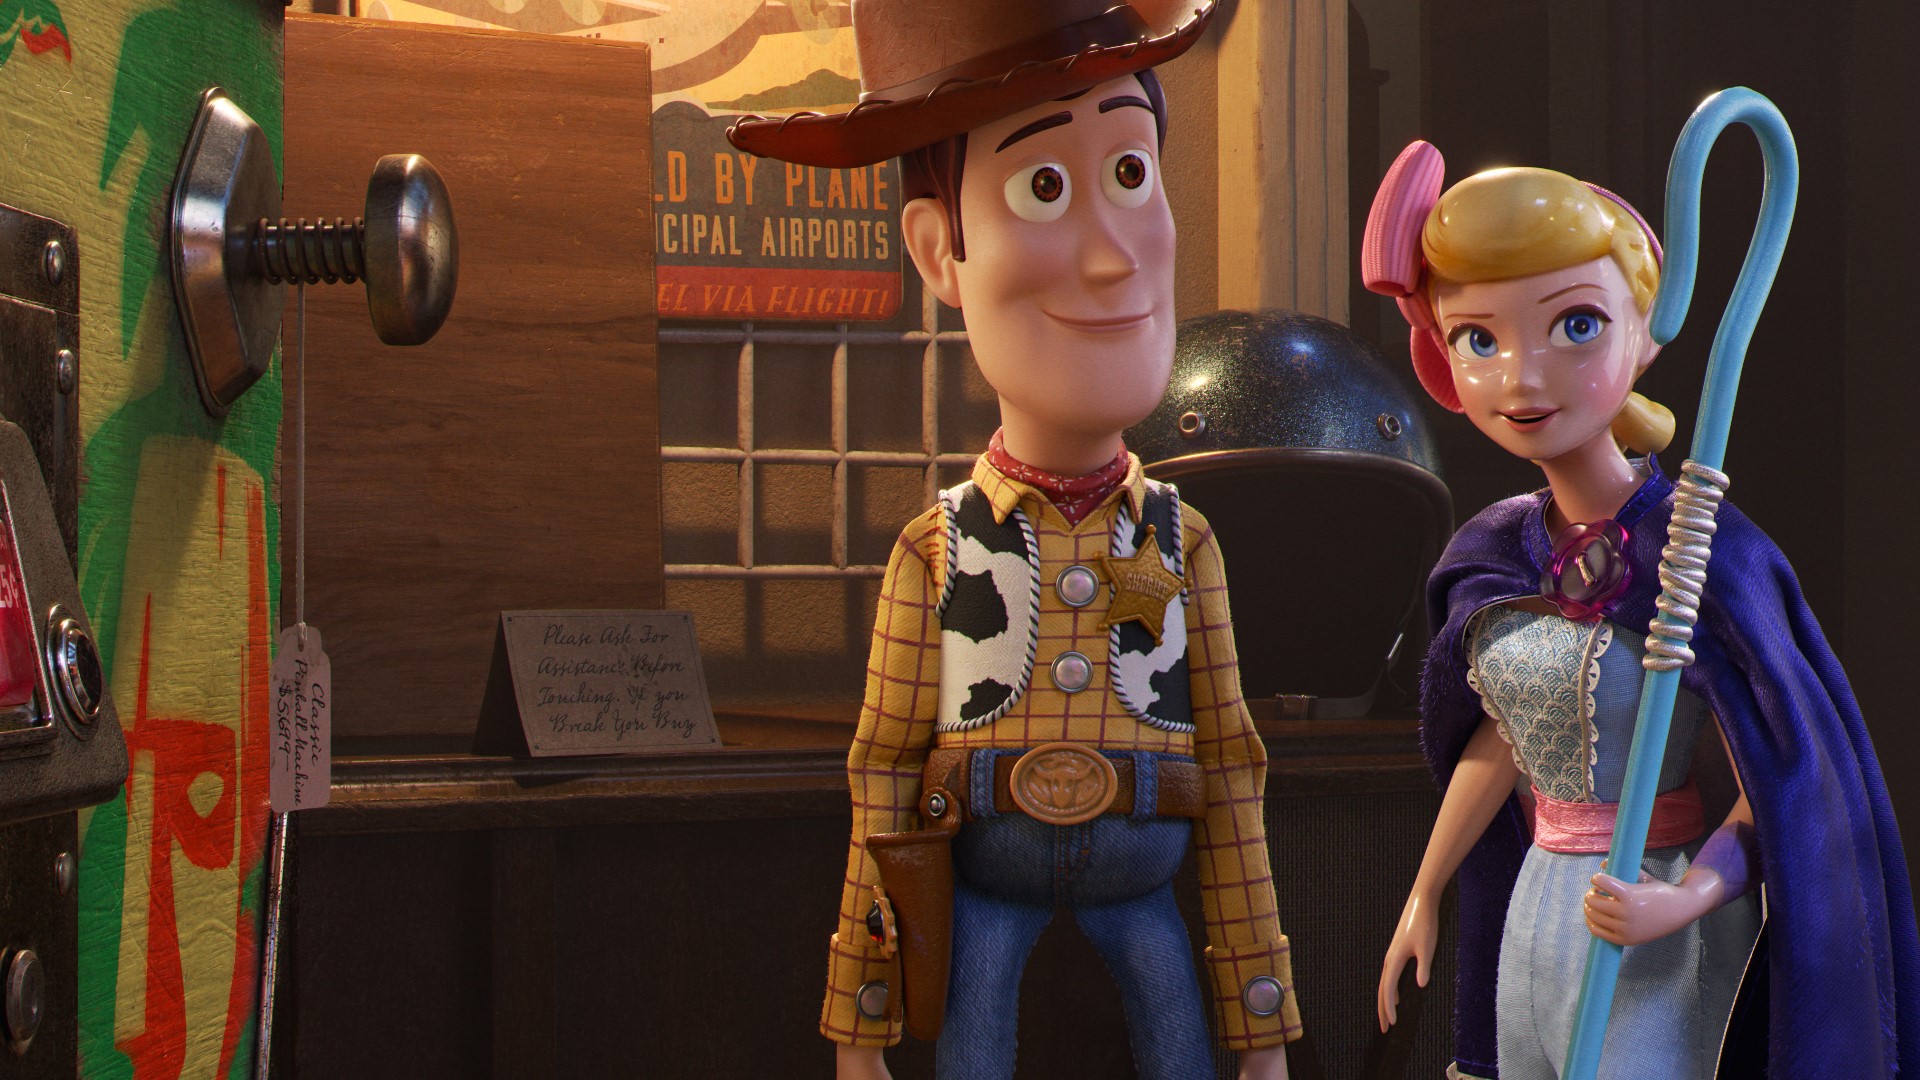 A viral tweet claims Woody is bisexual in "Toy Story 4" but is it true? Chris Rogers verifies.